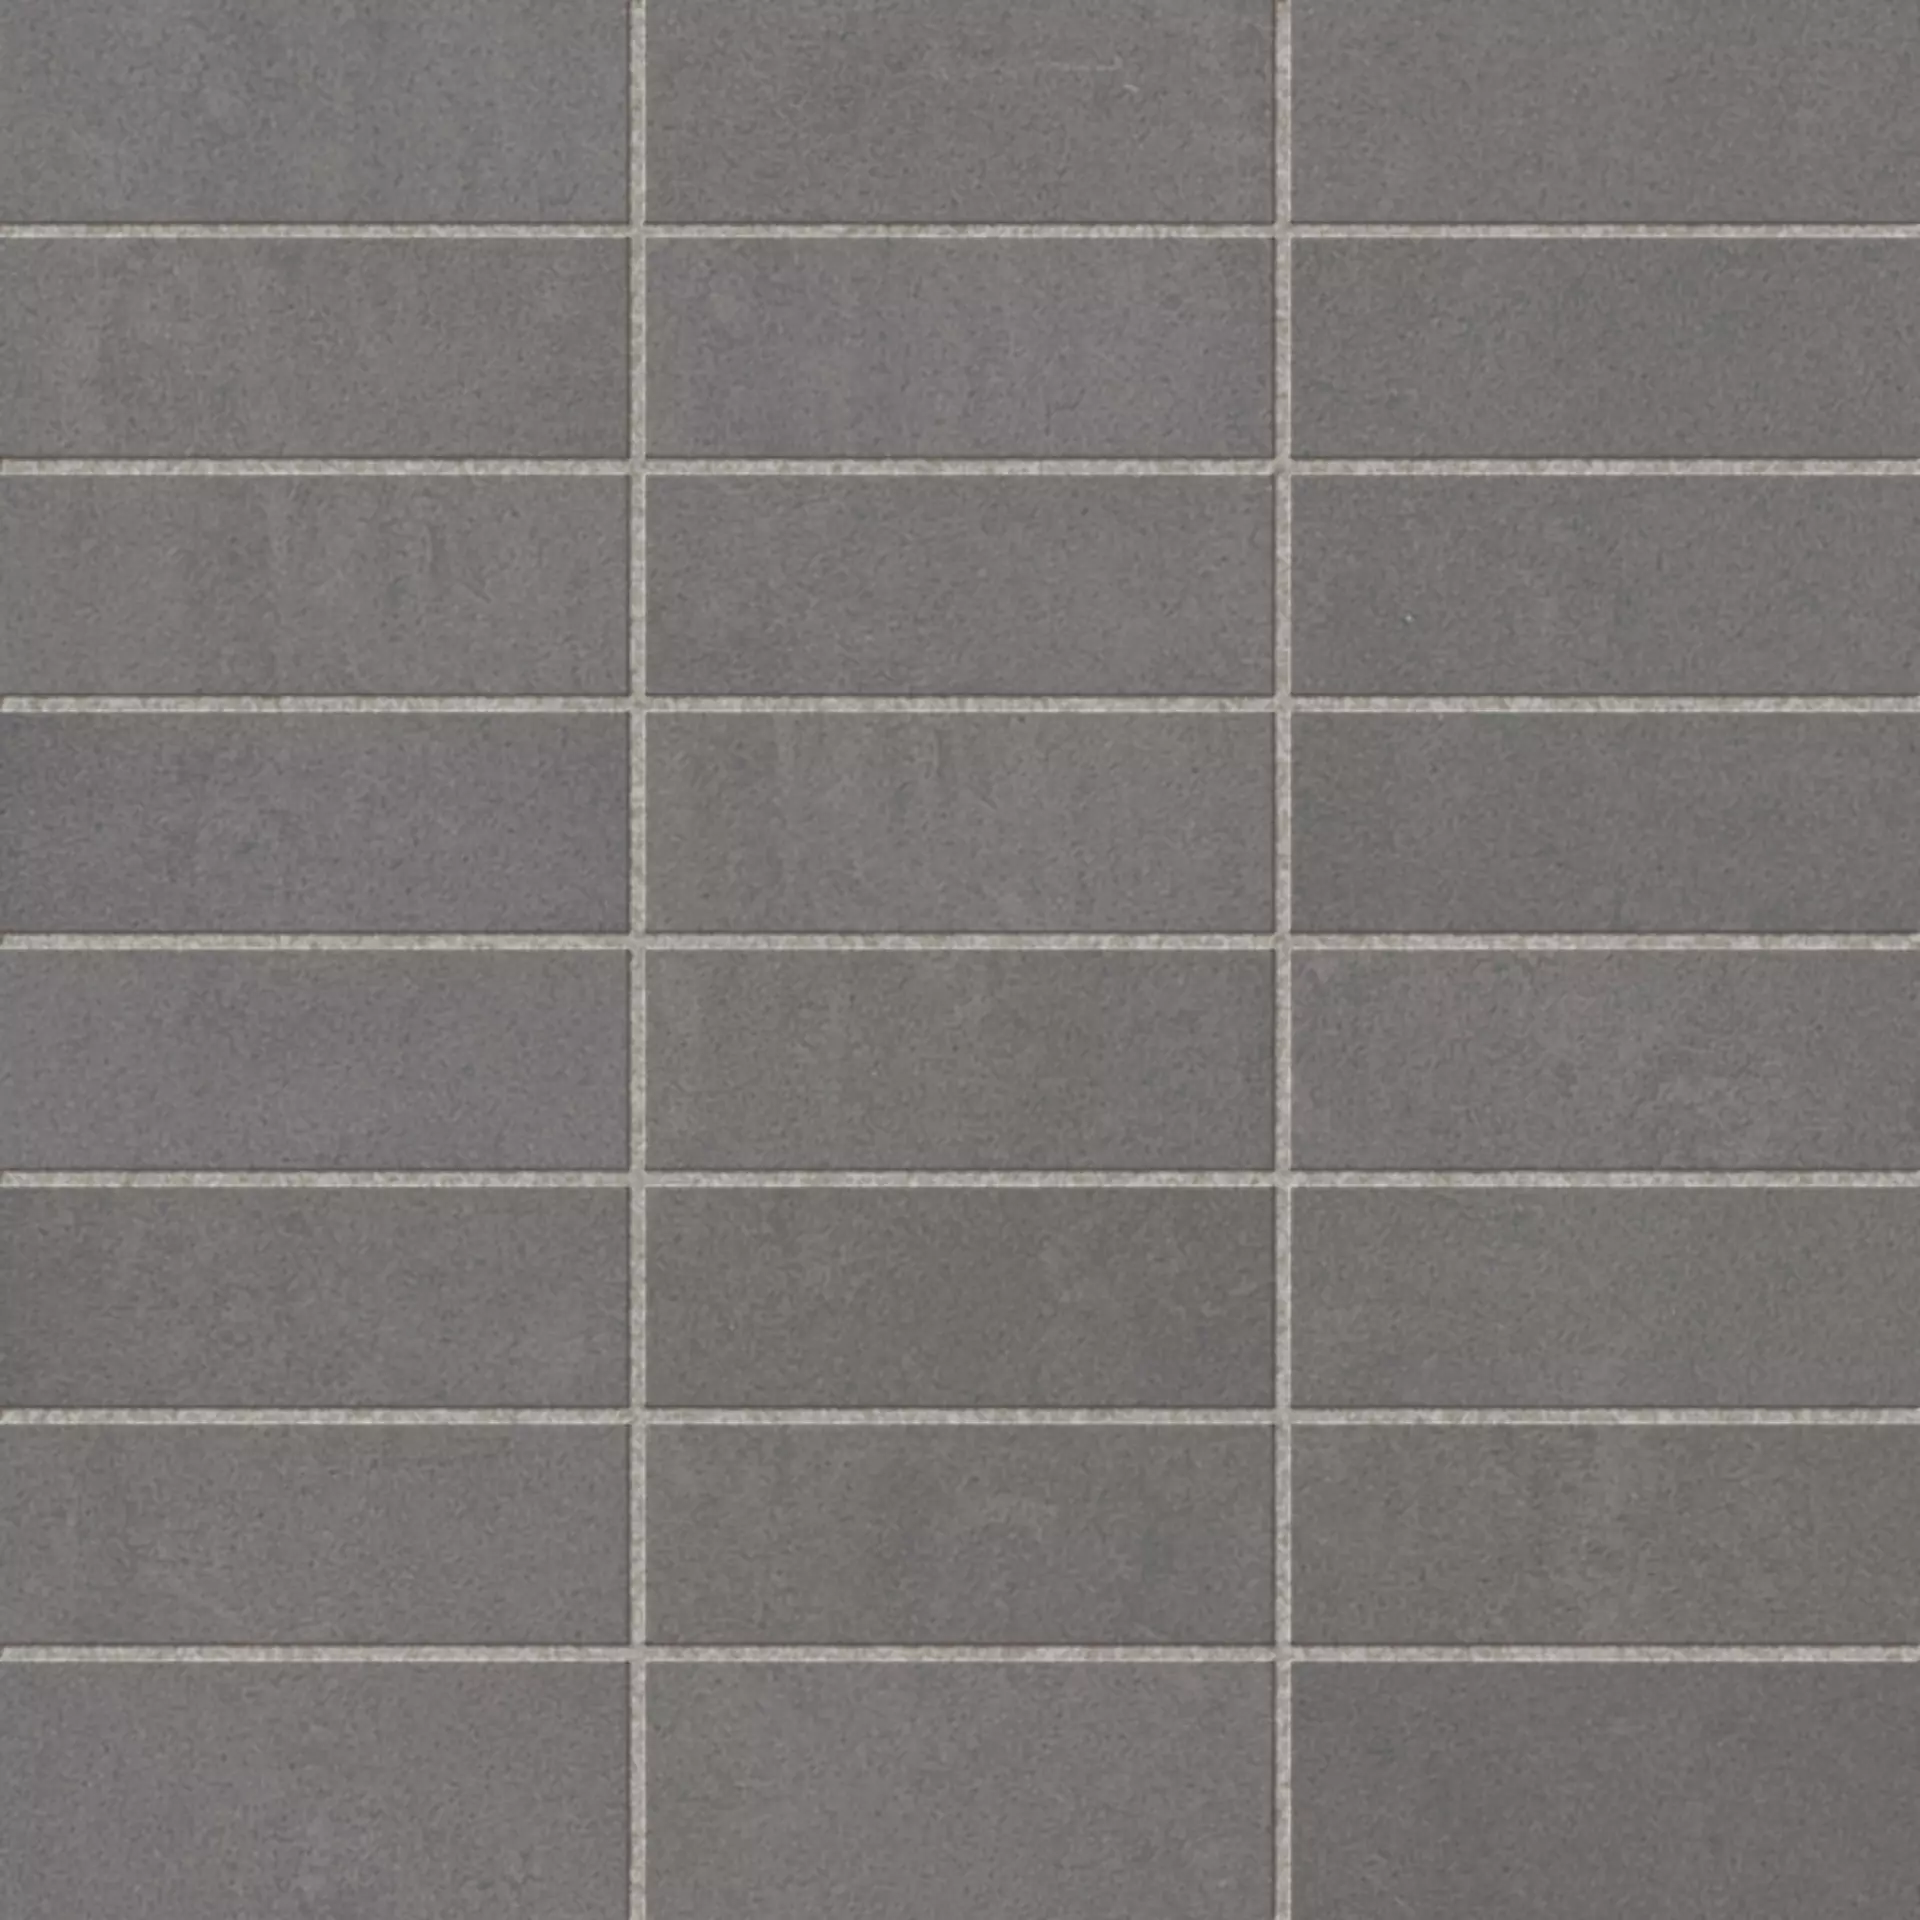 Margres Time 2.0 Carbon Natural Mosaic 3,5x10 B25M310T28BF 30x30cm rectified 10,5mm